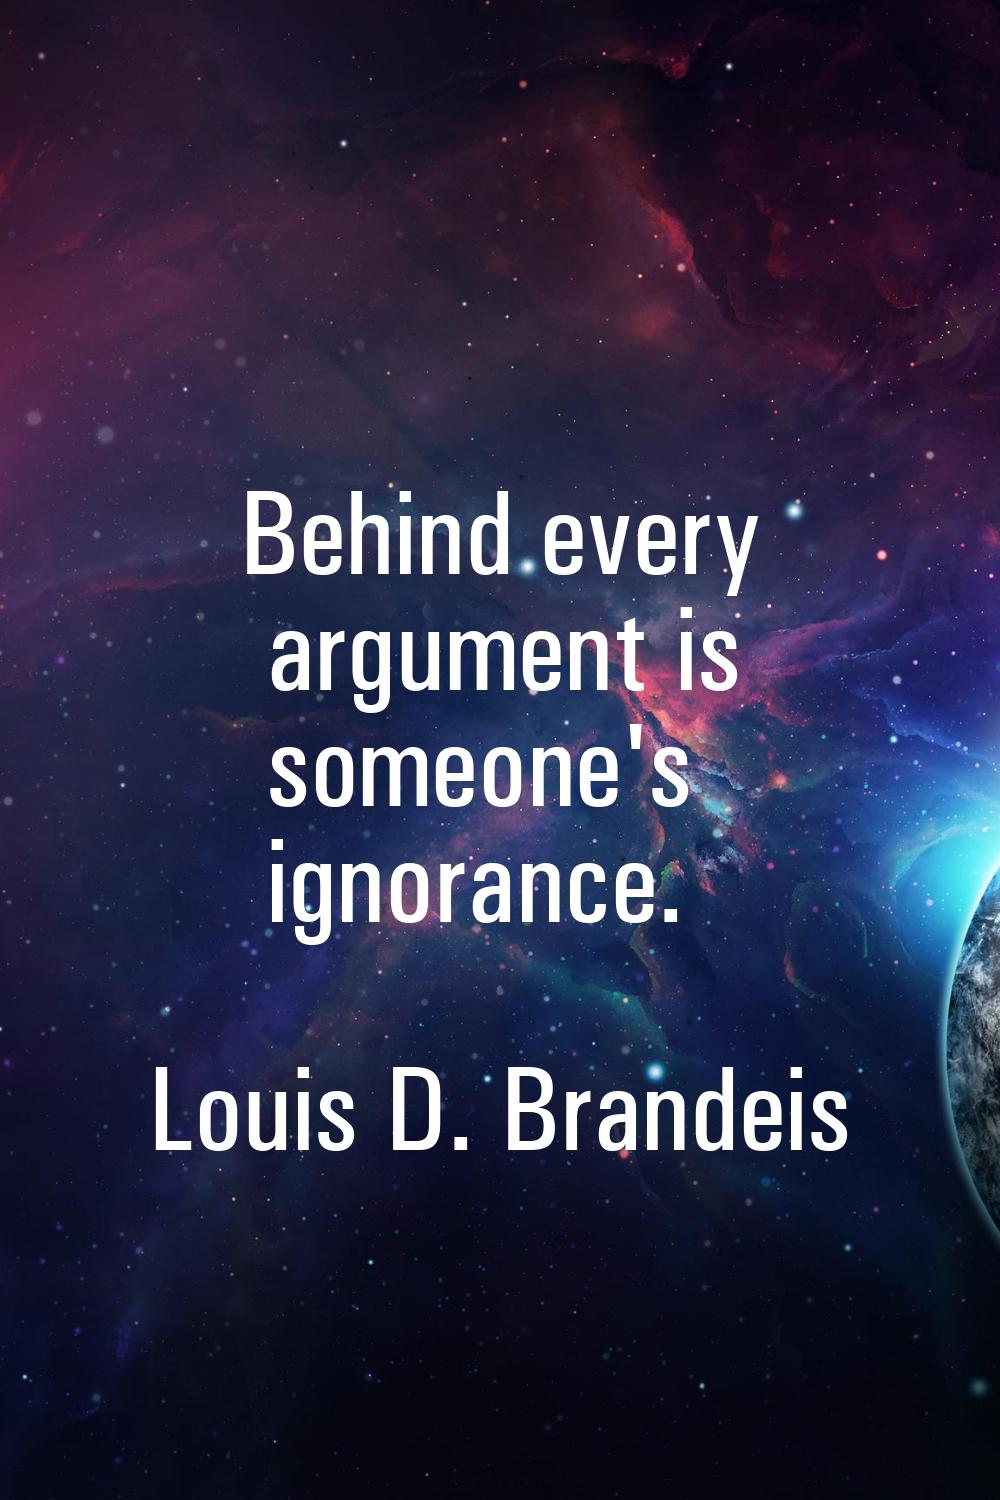 Behind every argument is someone's ignorance.